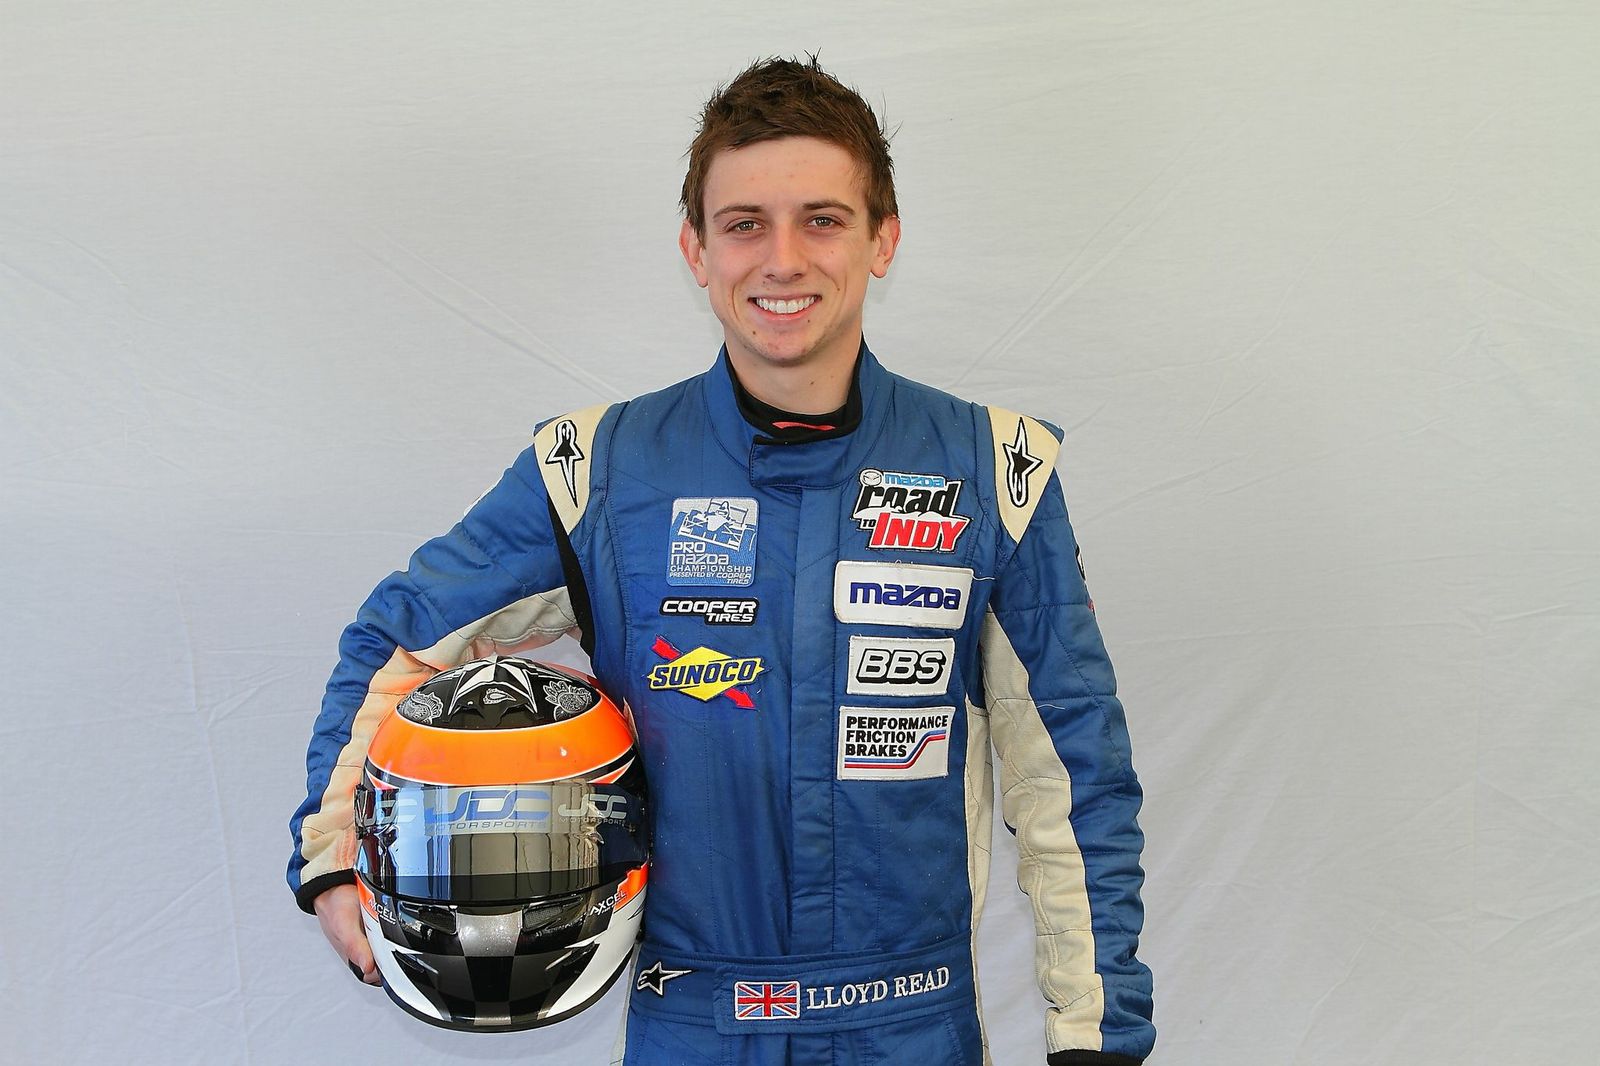 Lloyd Read has his sights set on being a top racing driver